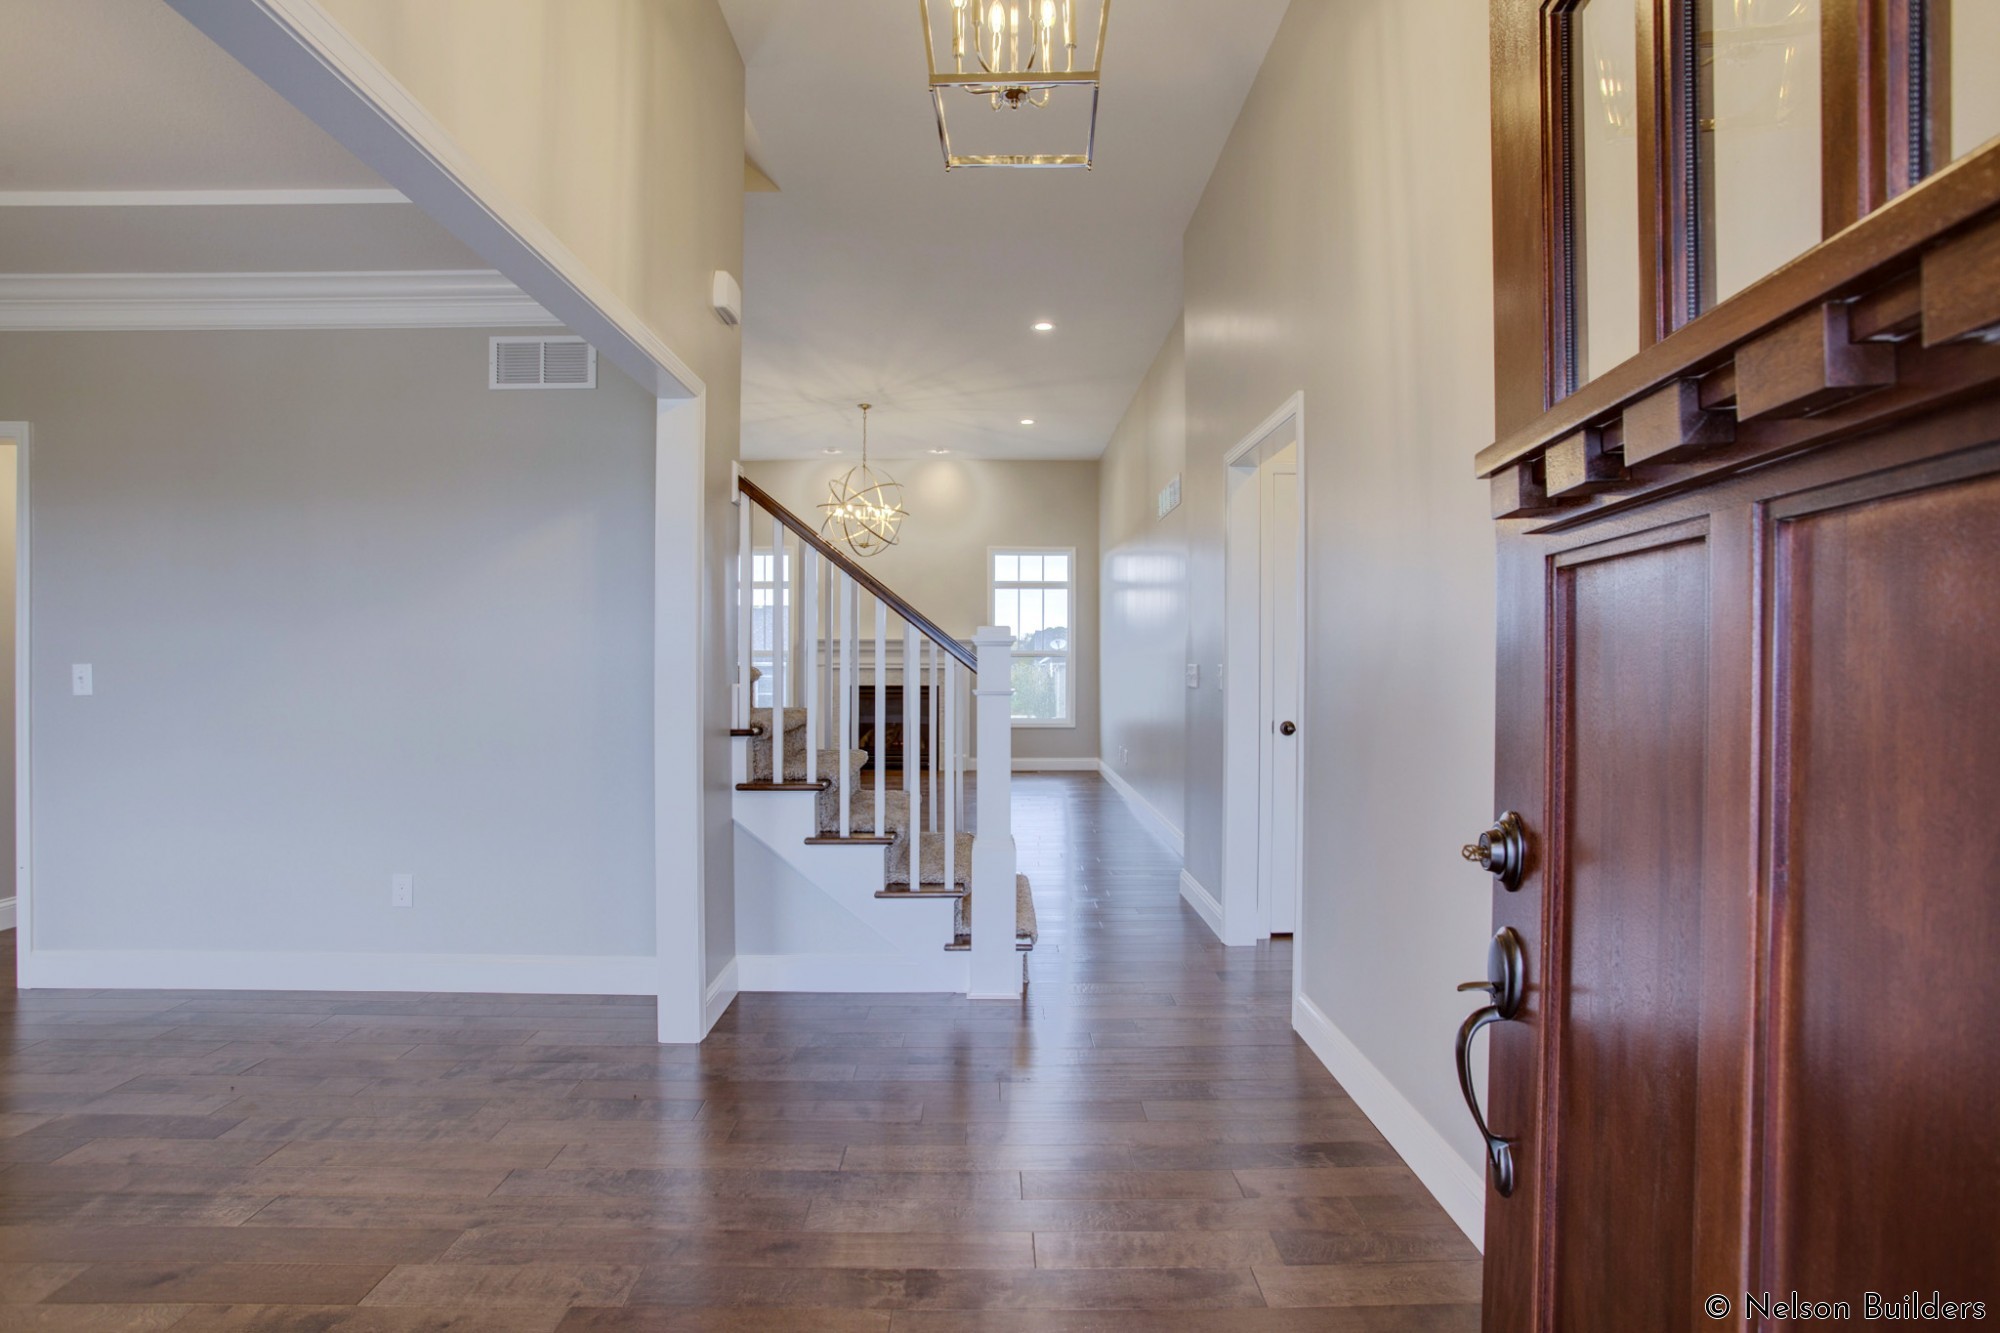 The wood front door opens into the grand foyer and great room of this new Cherrydale plan by Nelson Builders.